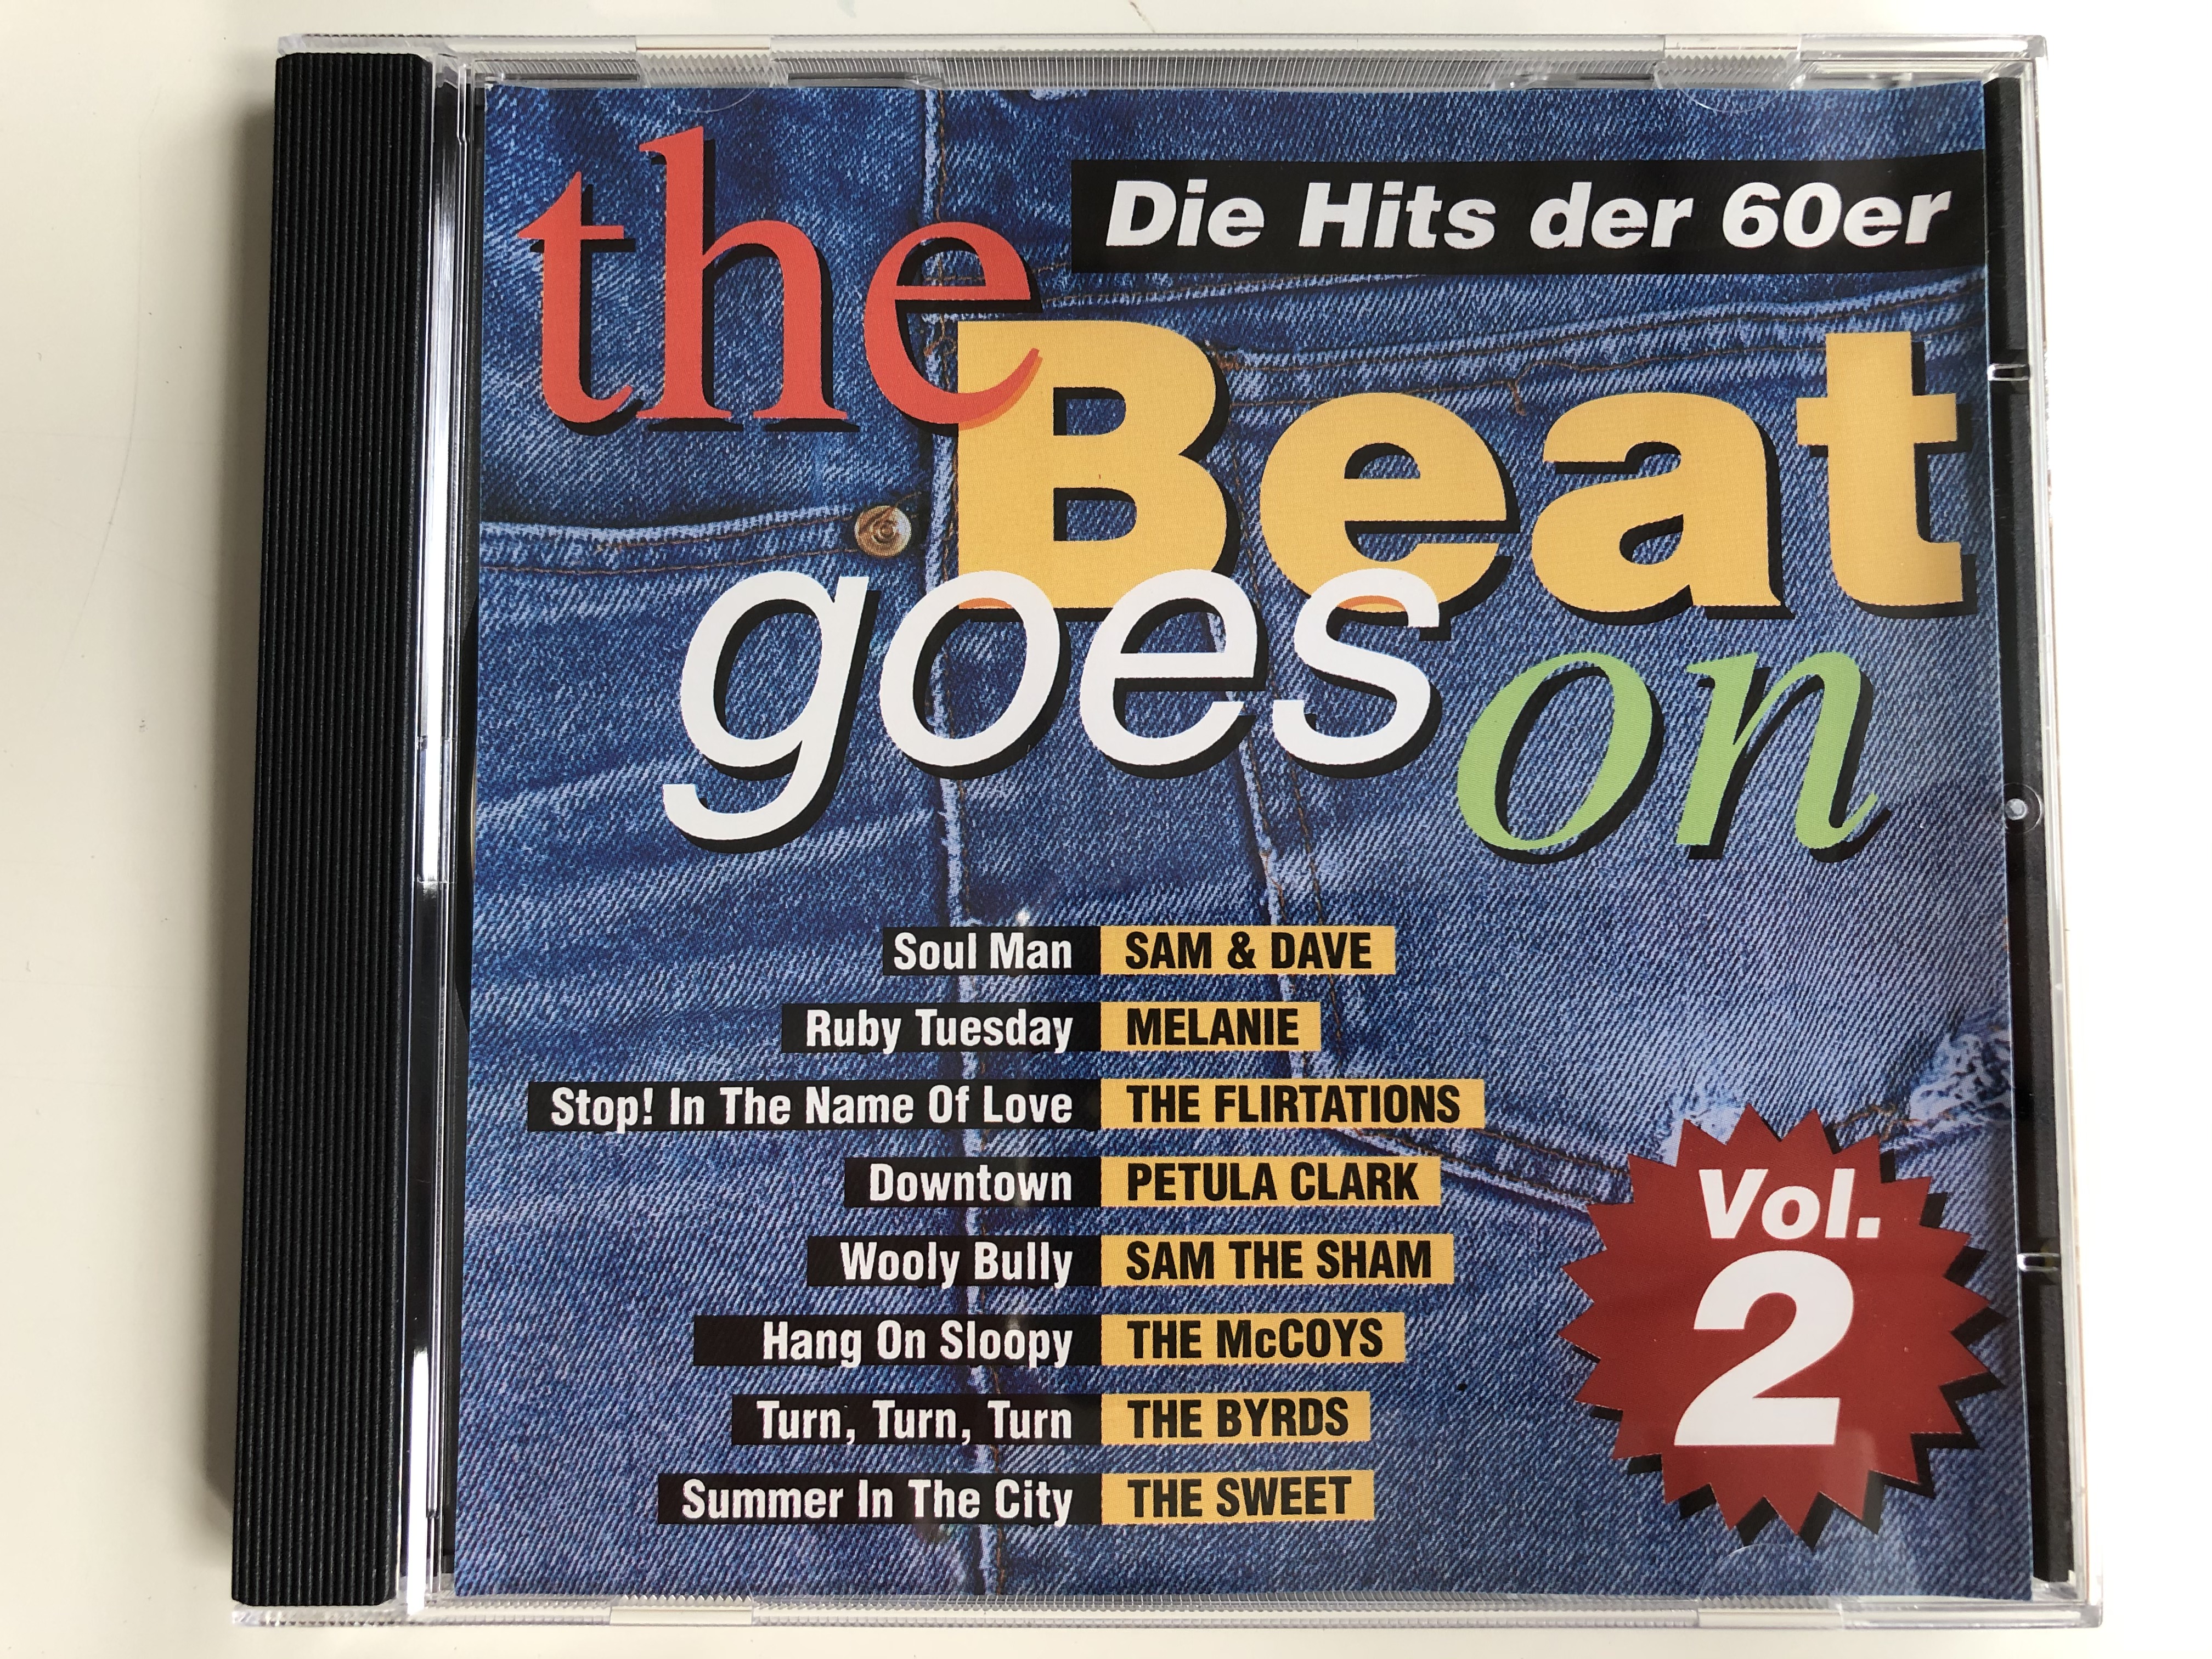 the-beat-goes-on-die-hits-der-60er-vol.-2-soulman-sam-dave-ruby-tuesday-melanie-stop-in-the-name-of-love-the-flirtations-downtown-petula-clark-wooly-bully-sam-the-sham-1-.jpg